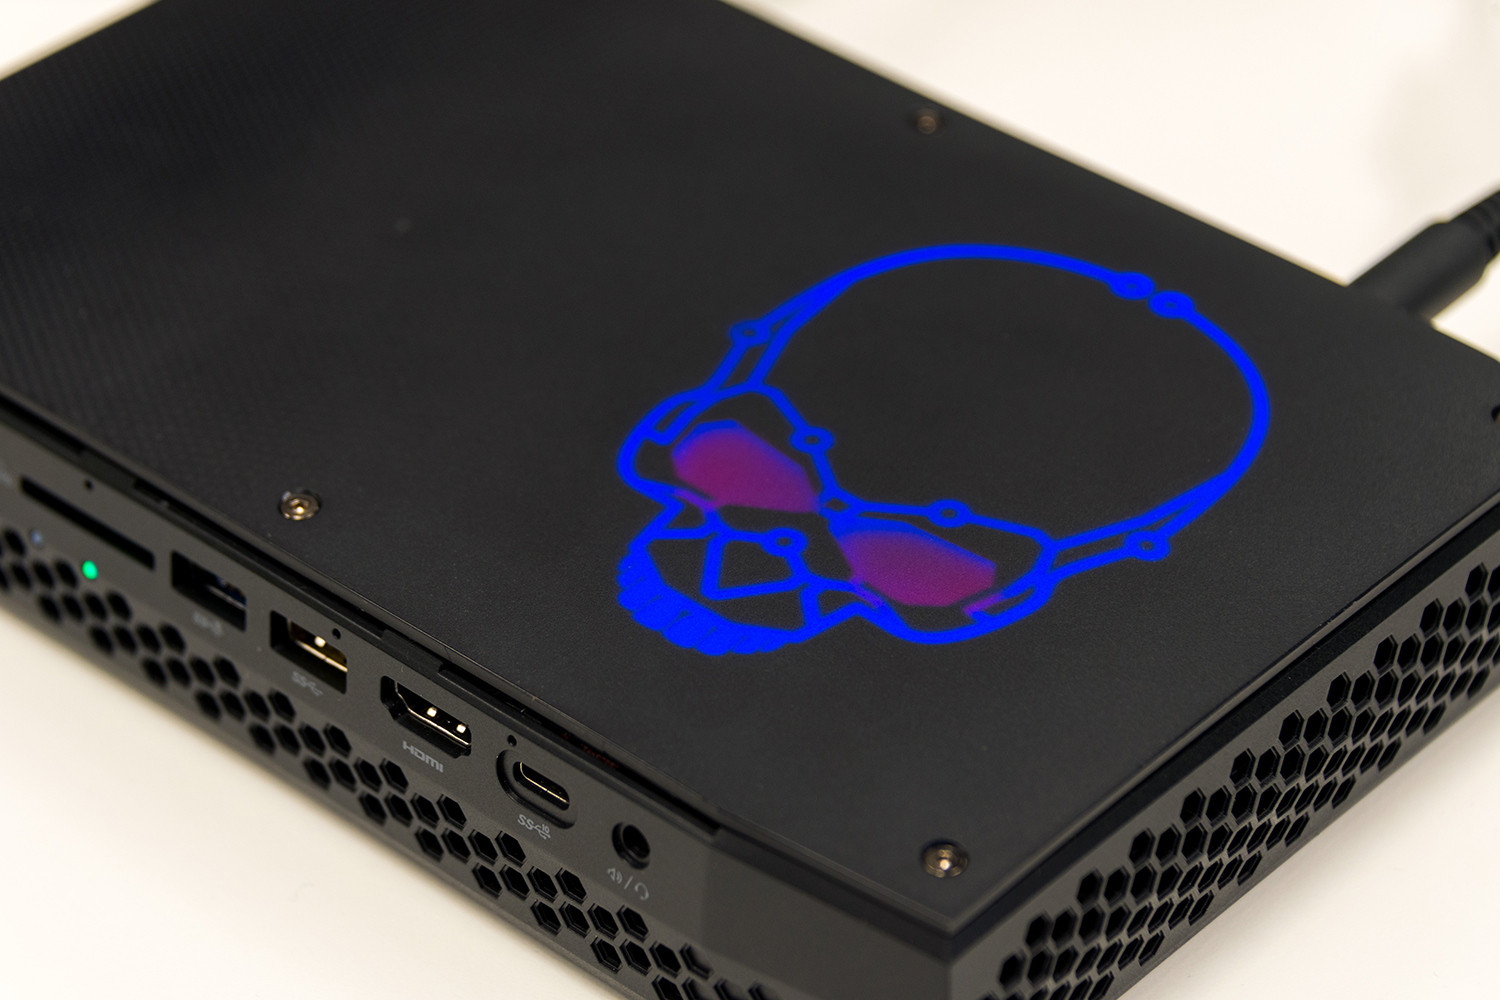 Intel Hades Canyon NUC8i7HVK Review | Digital Trends